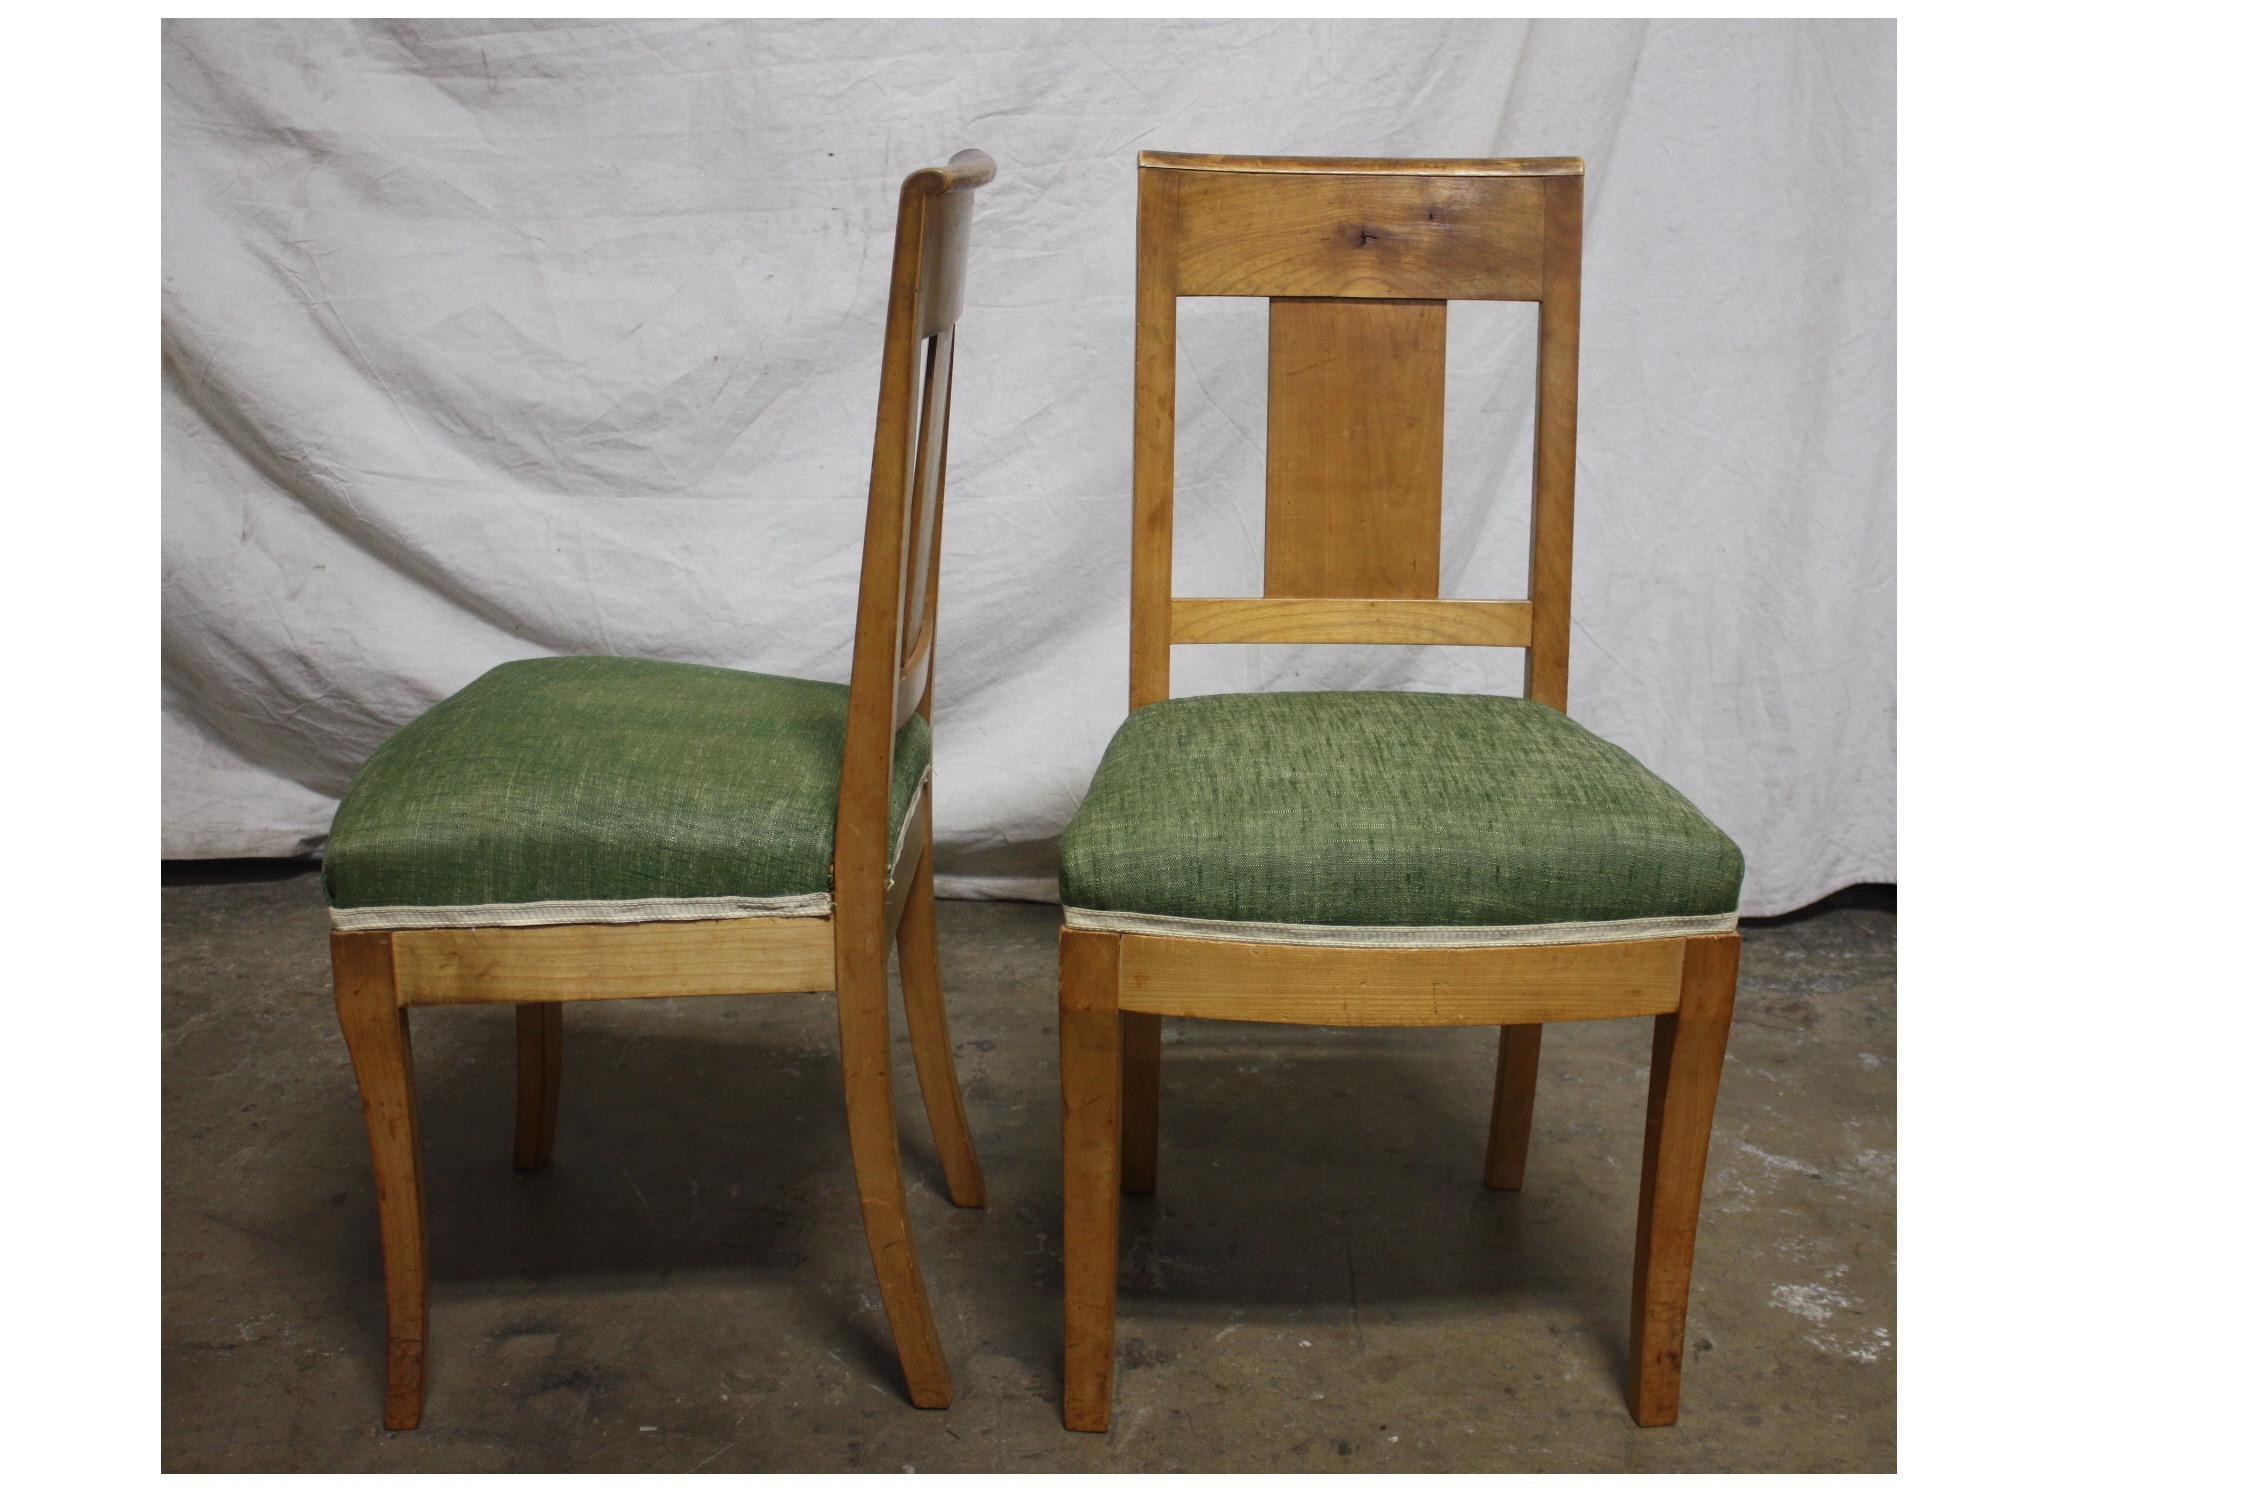 French 19th Century Restauration Dining Room Chairs In Good Condition For Sale In Stockbridge, GA